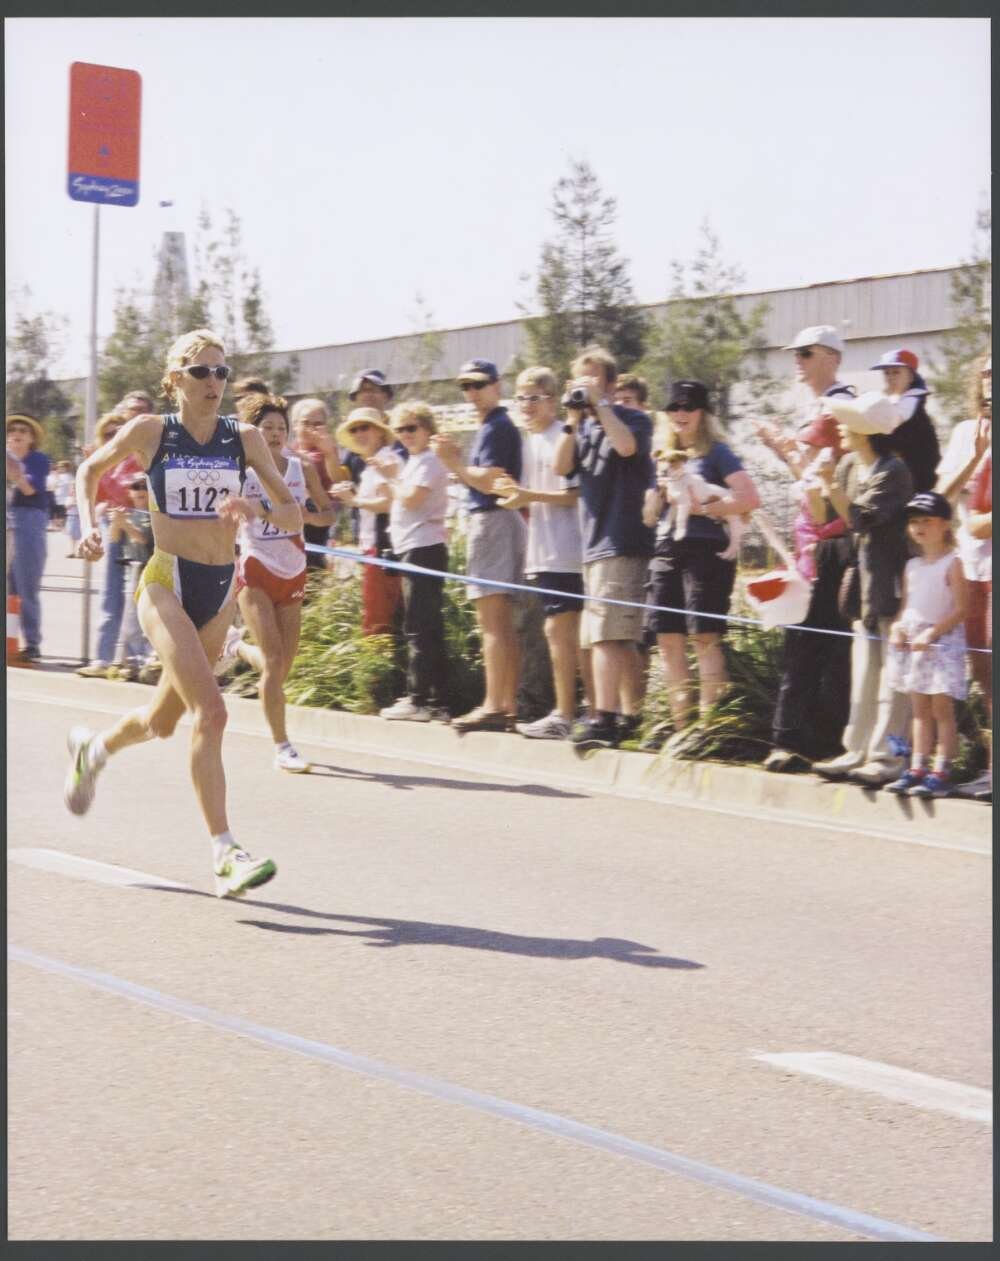 Woman participating in a marathon, with supporters of all ages standing along the road, including a woman holding a small dog